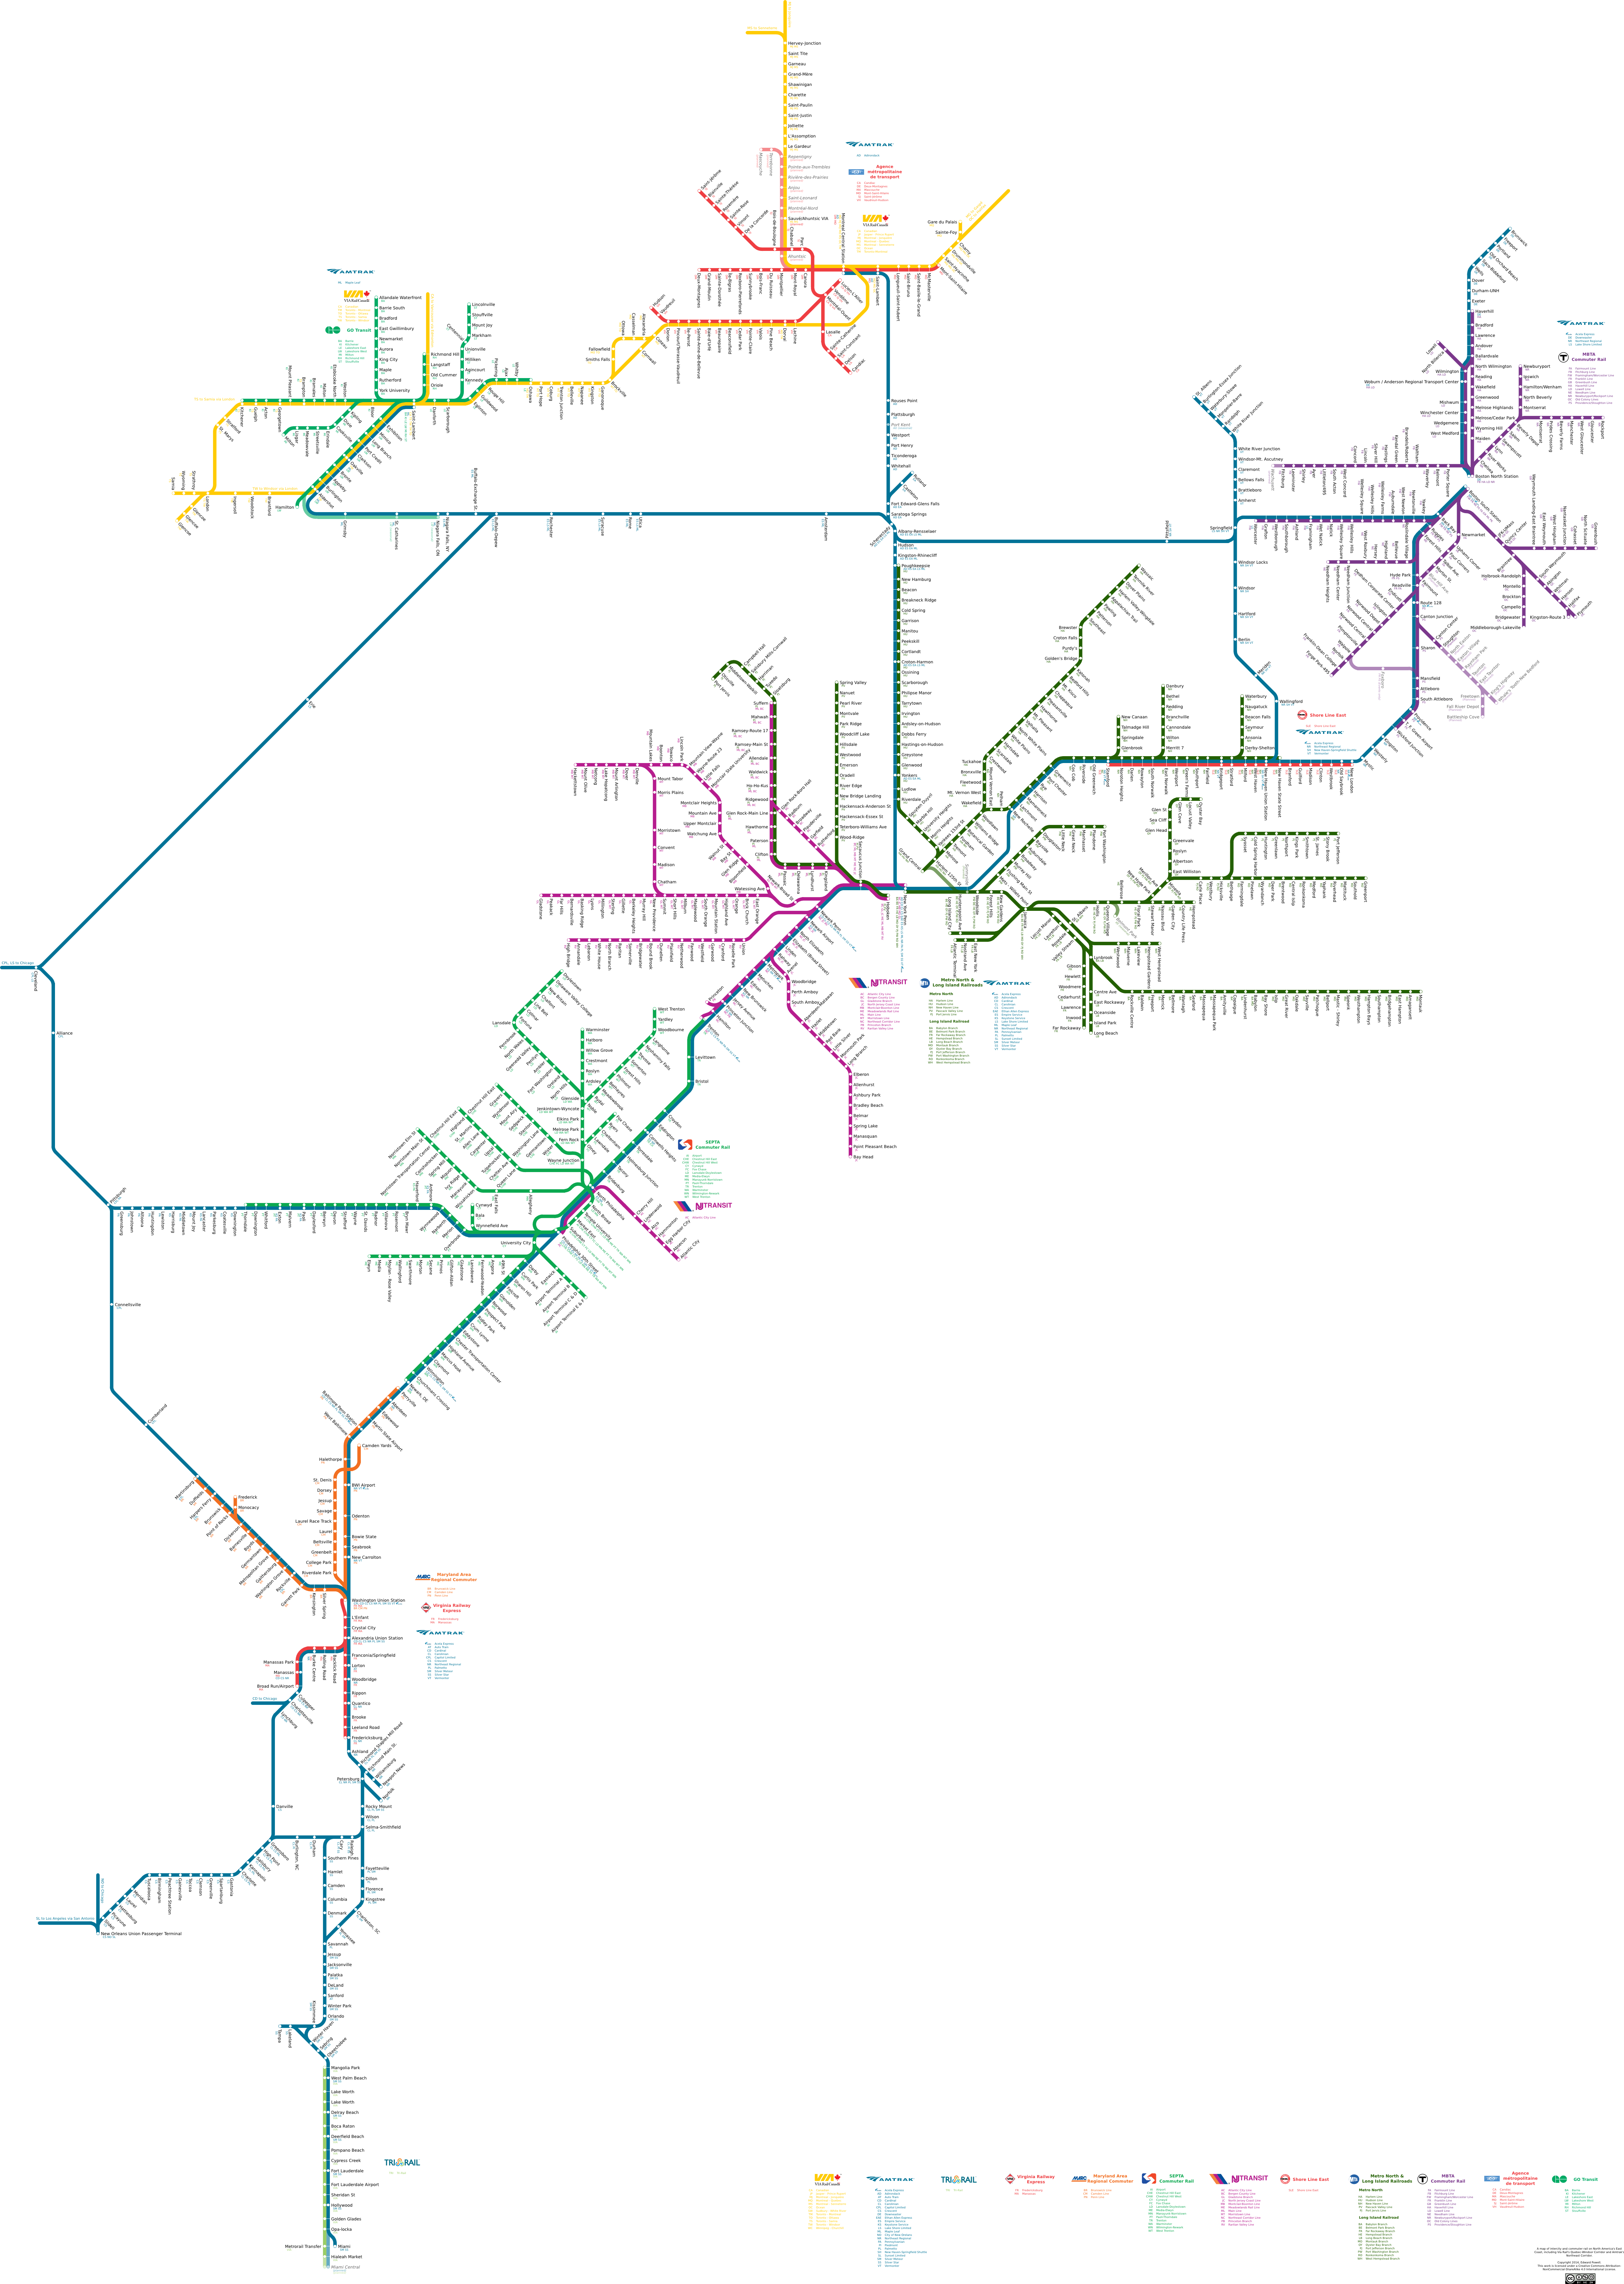 Transit map of eastern North America